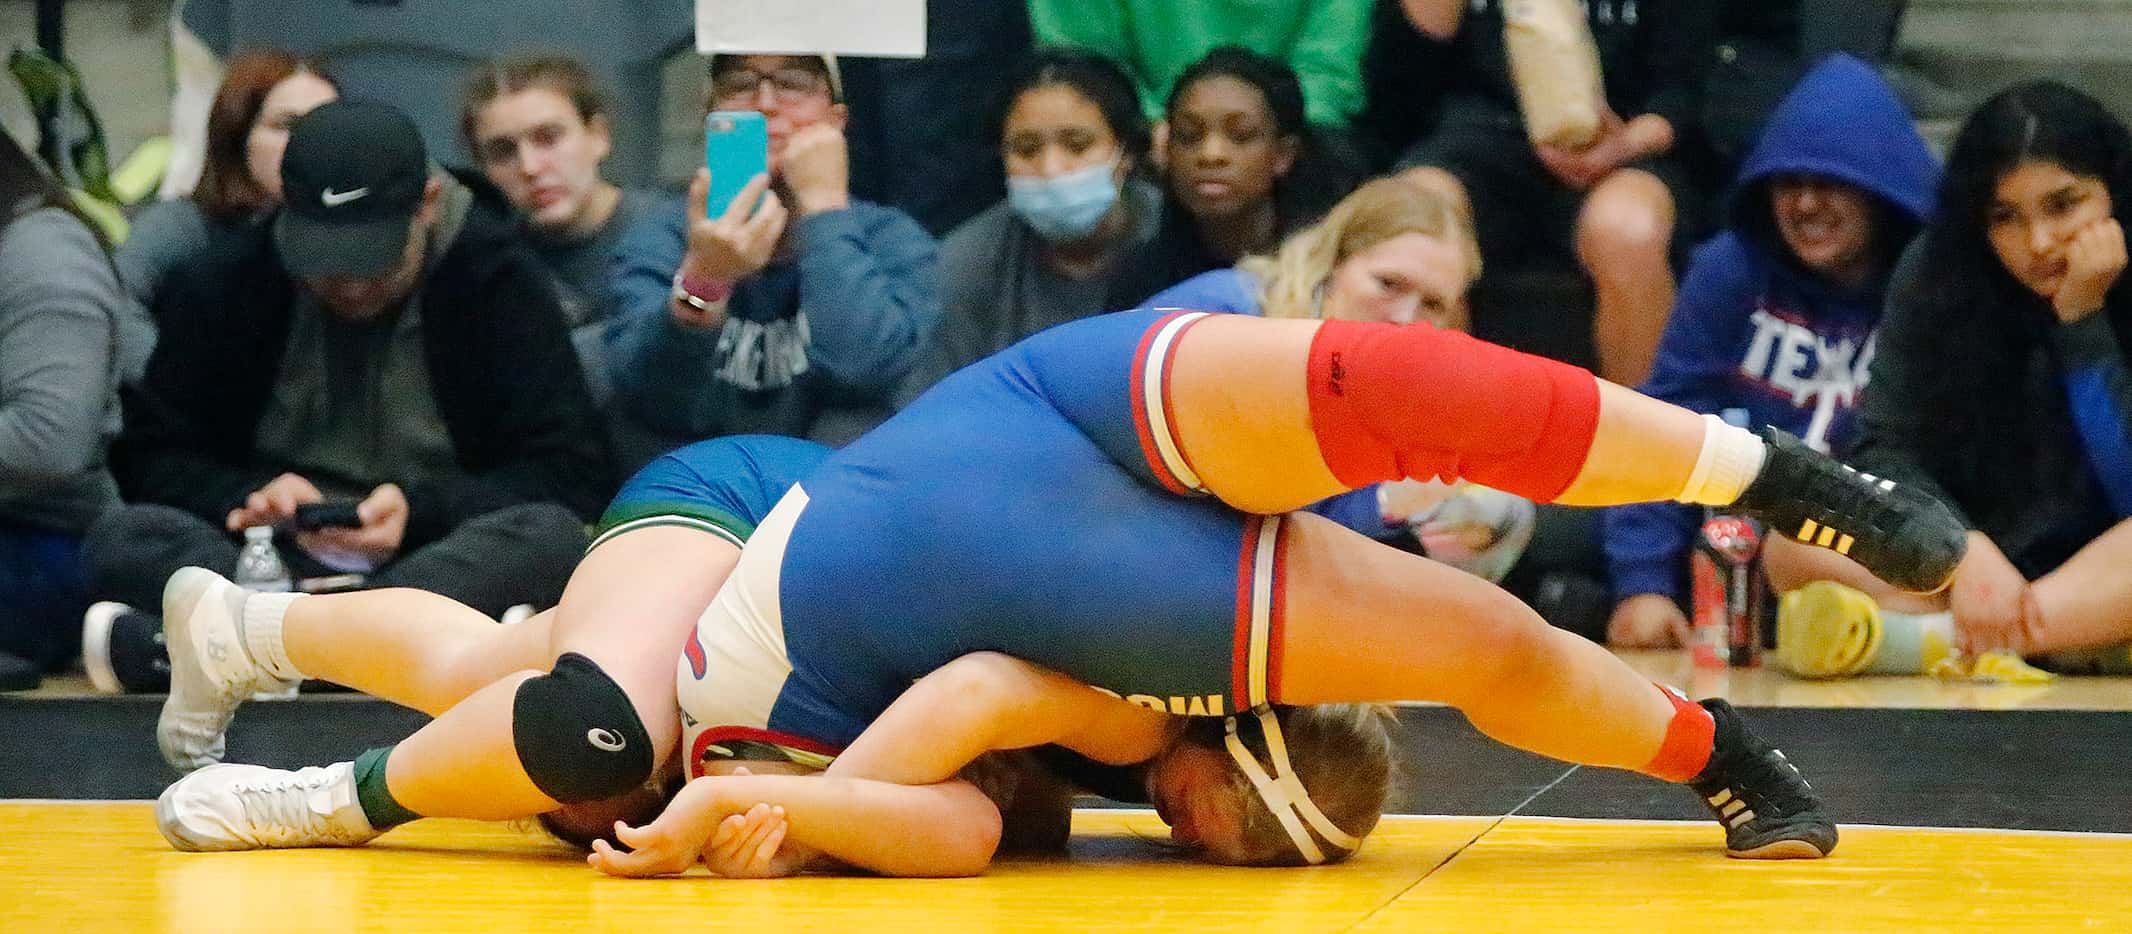 Hadley Snyder (left) of Reedy High School, attempts to pin Marisol Zapata of Grapevine High...